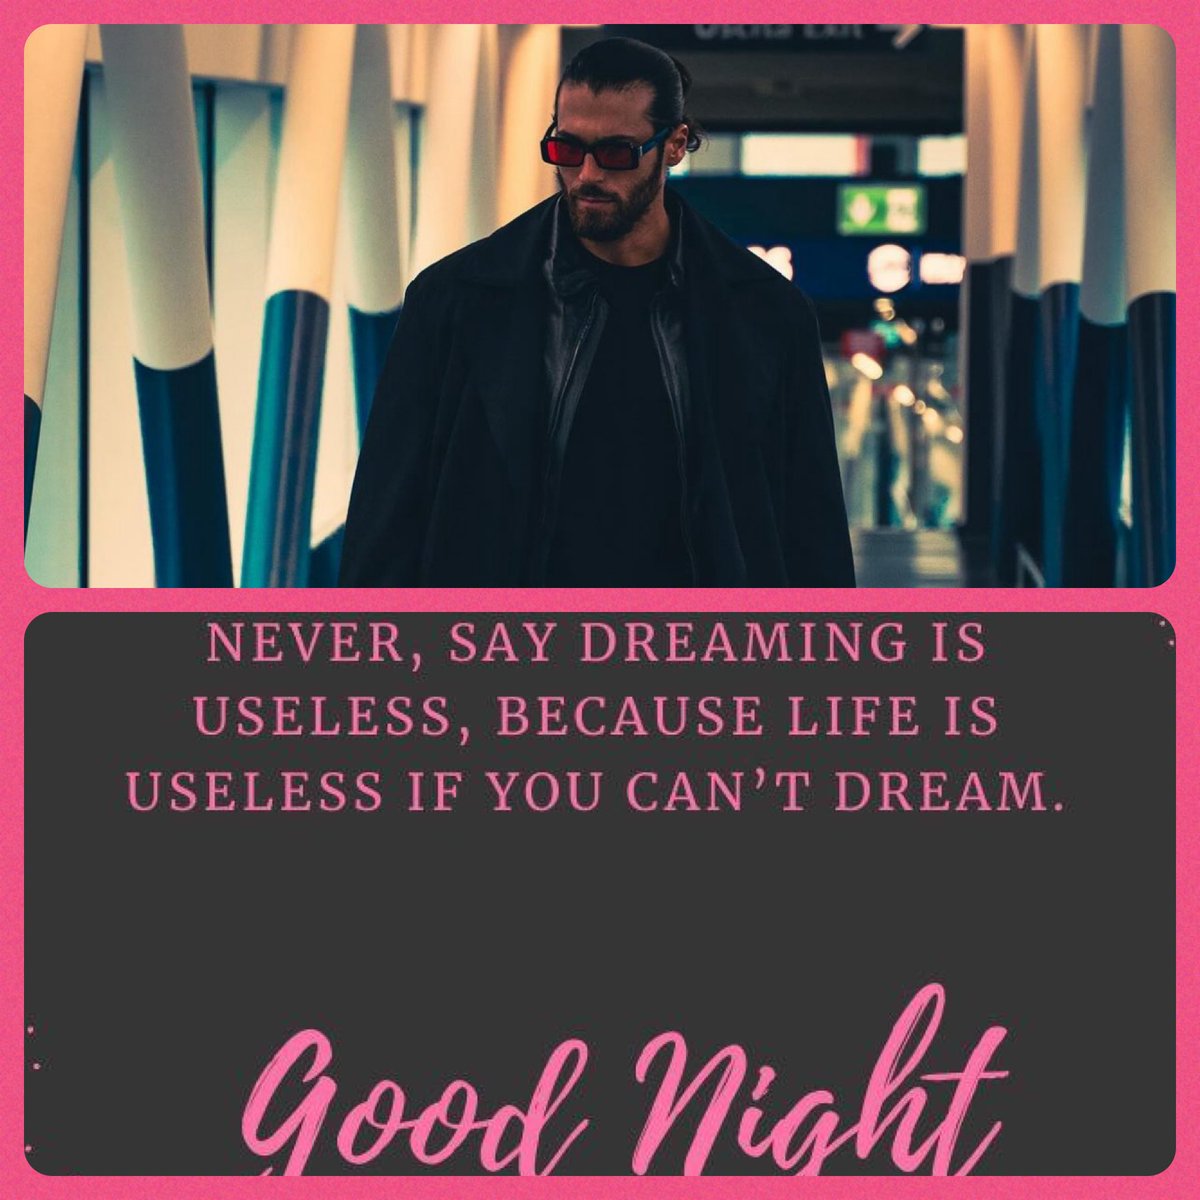 Good Evening Fandom. The CanYamanEnglishTeam sends wishes of a delightful evening. The future belongs to those who believe in the beauty of their dreams. Good Night and sweet dreams #CanYaman #Sandokan #ViolaComeIIMare2 CanYamanEnglishTeam